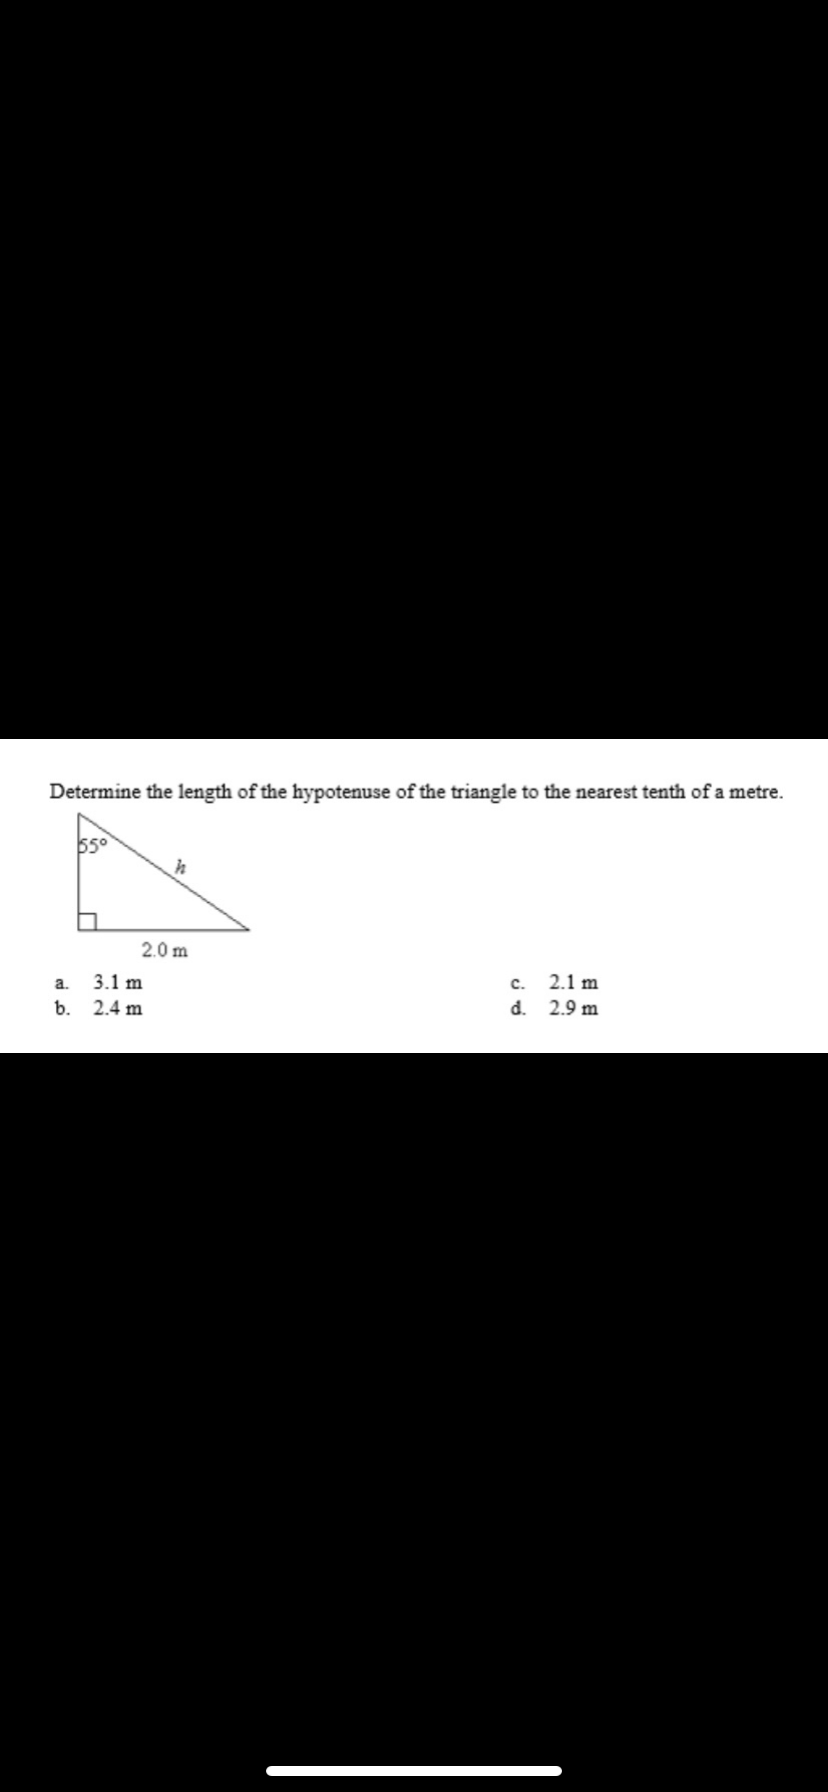 Determine the length of the hypotenuse of the triangle to the nearest tenth of a metre.
55°
2.0 m
a.
3.1 m
c.
2.1 m
b.
2.4 m
d. 2.9 m
